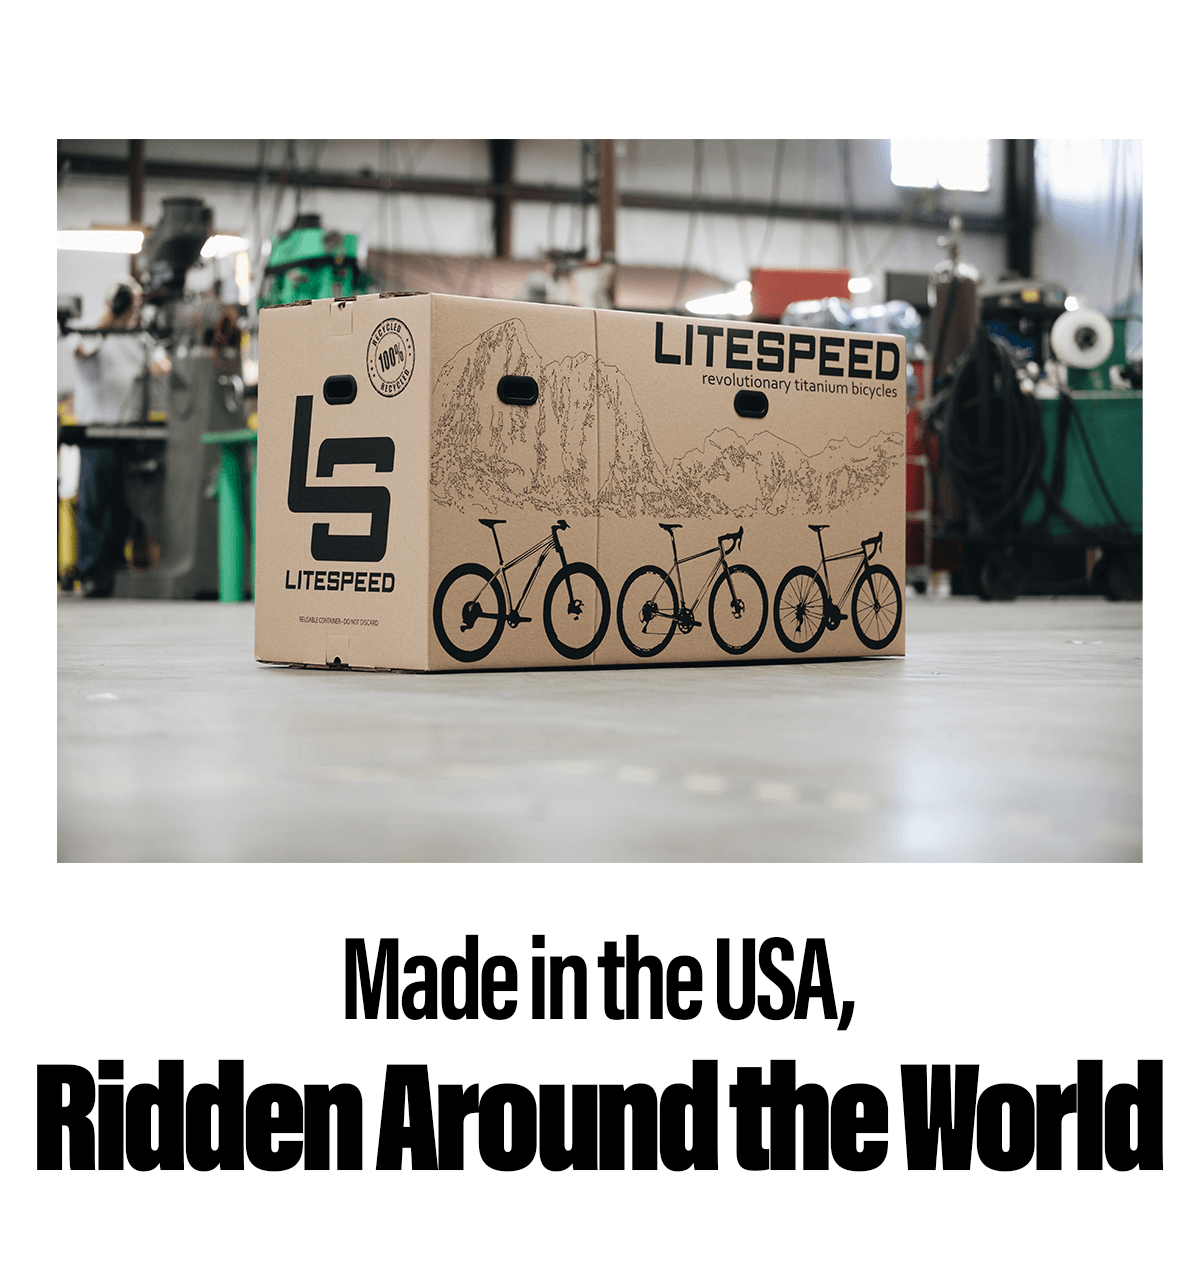 Made in the USA, Ridden around the world.